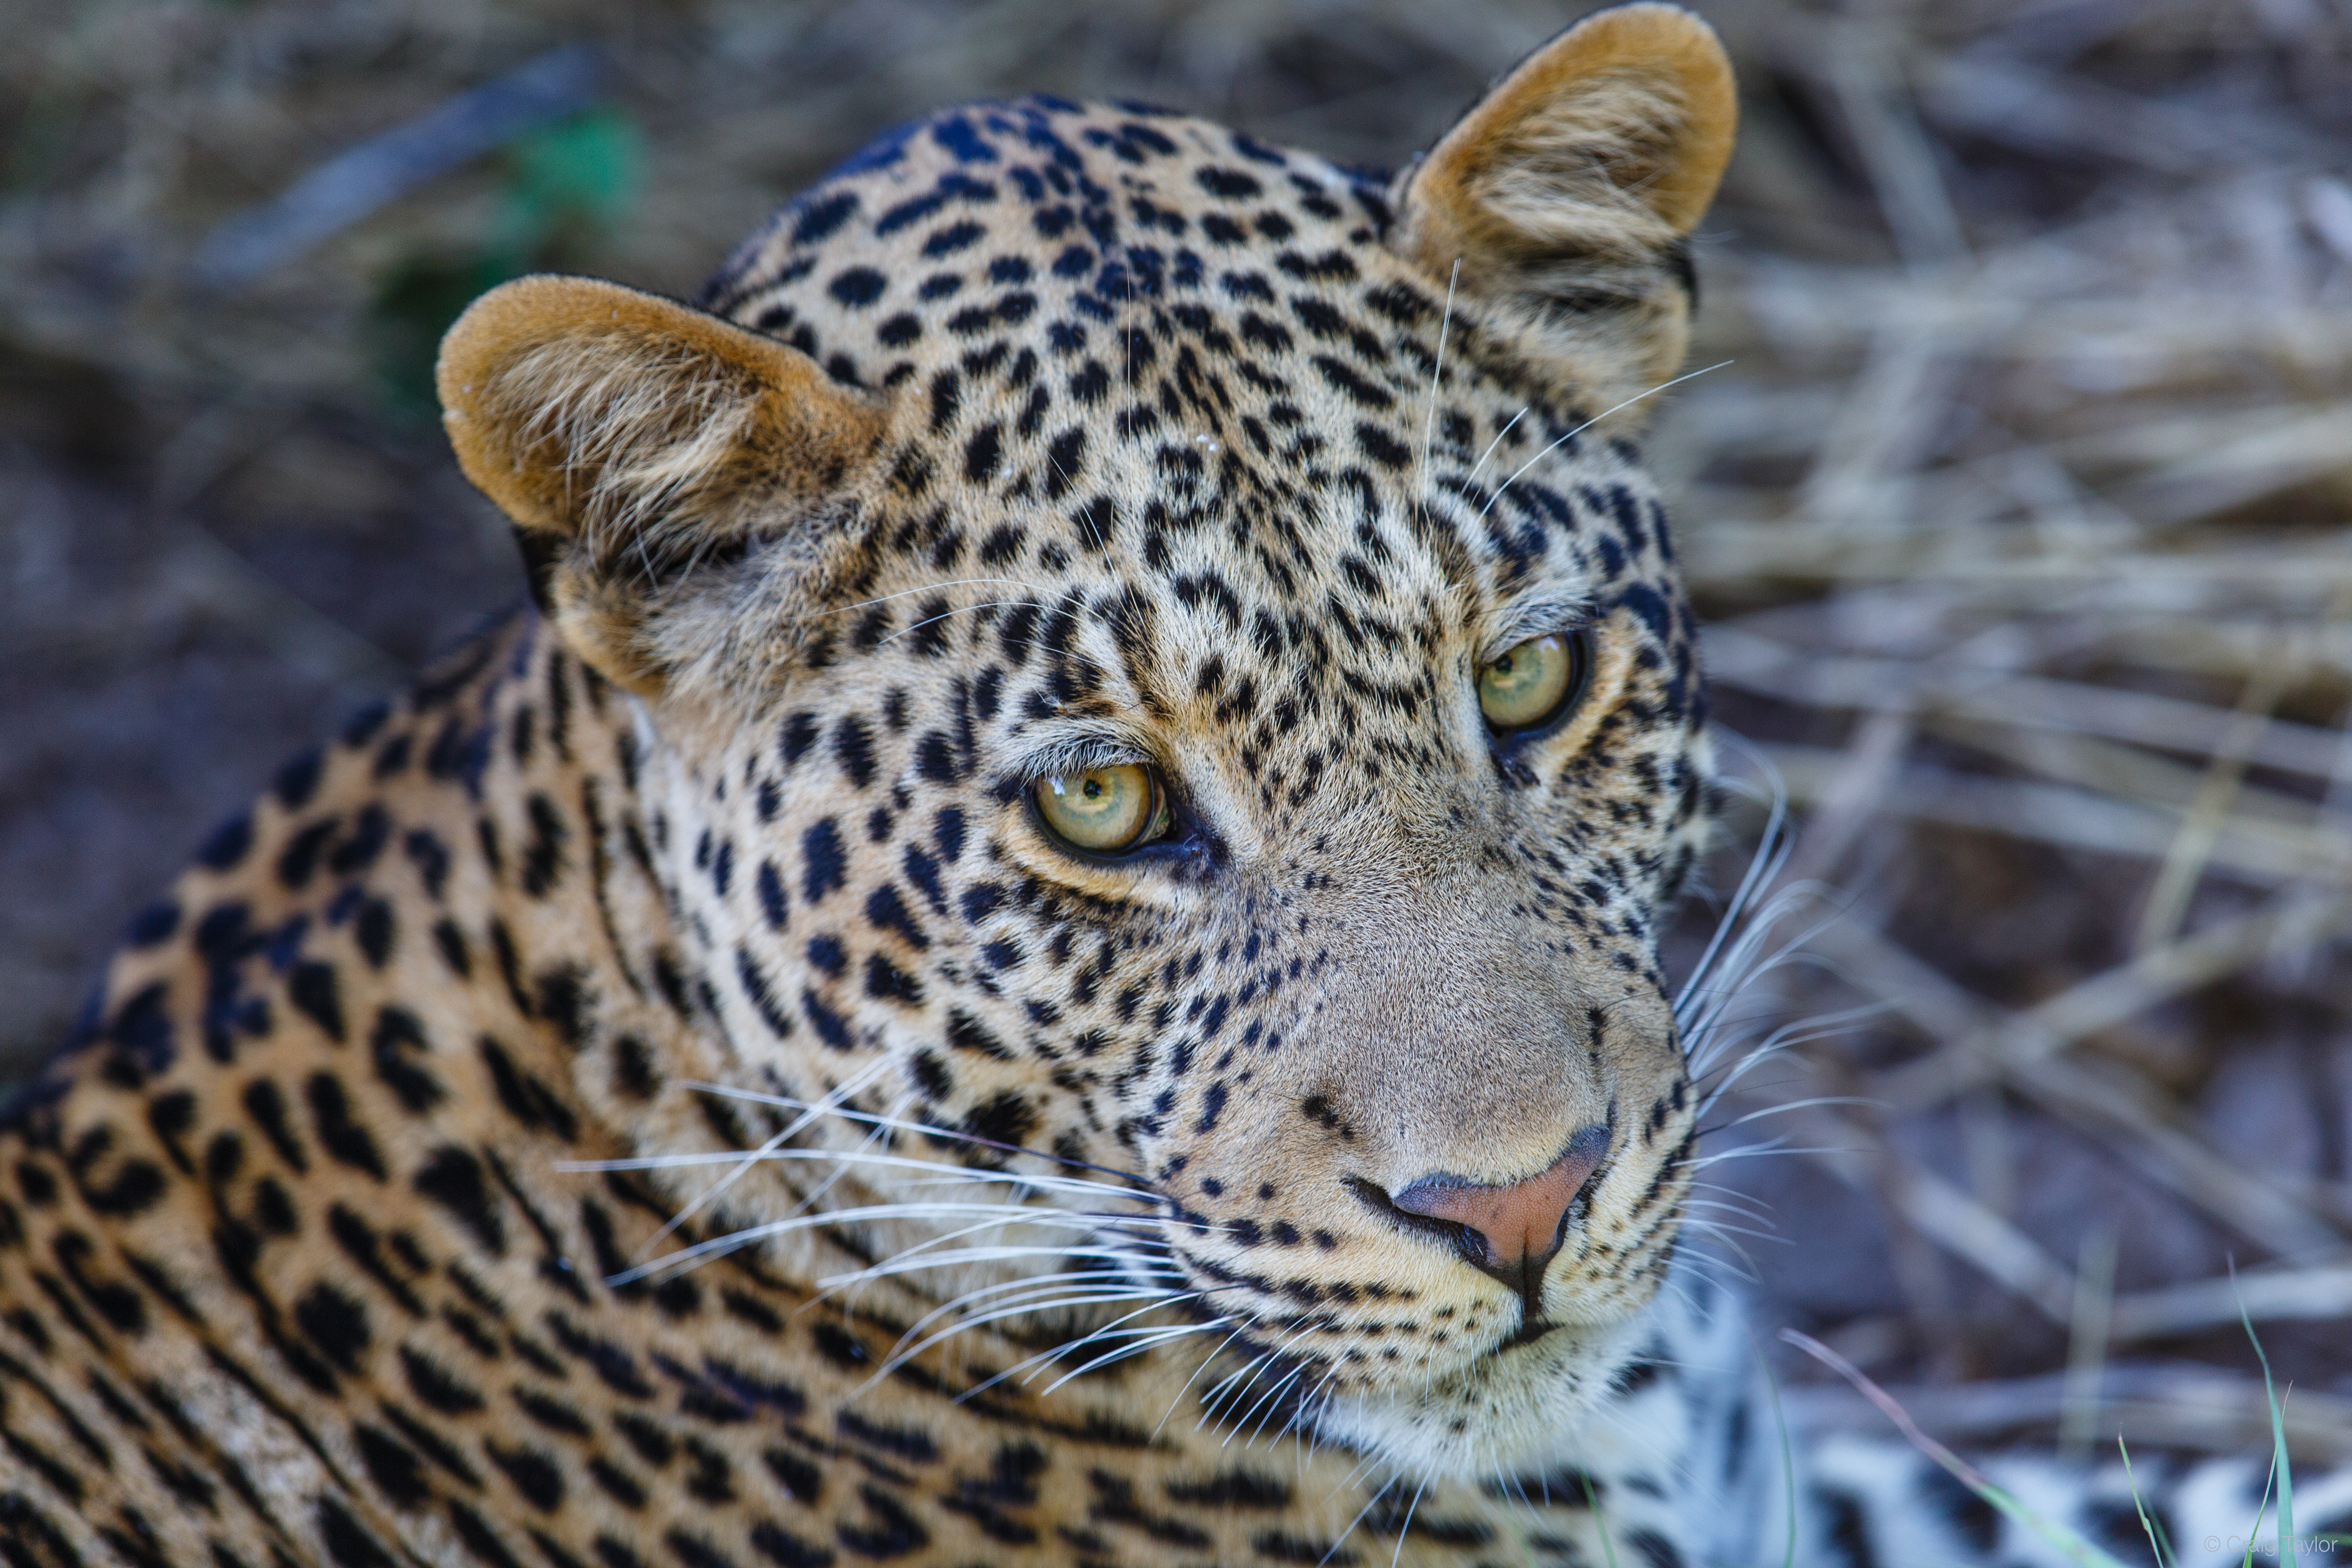 "Leopard looking back at camera"